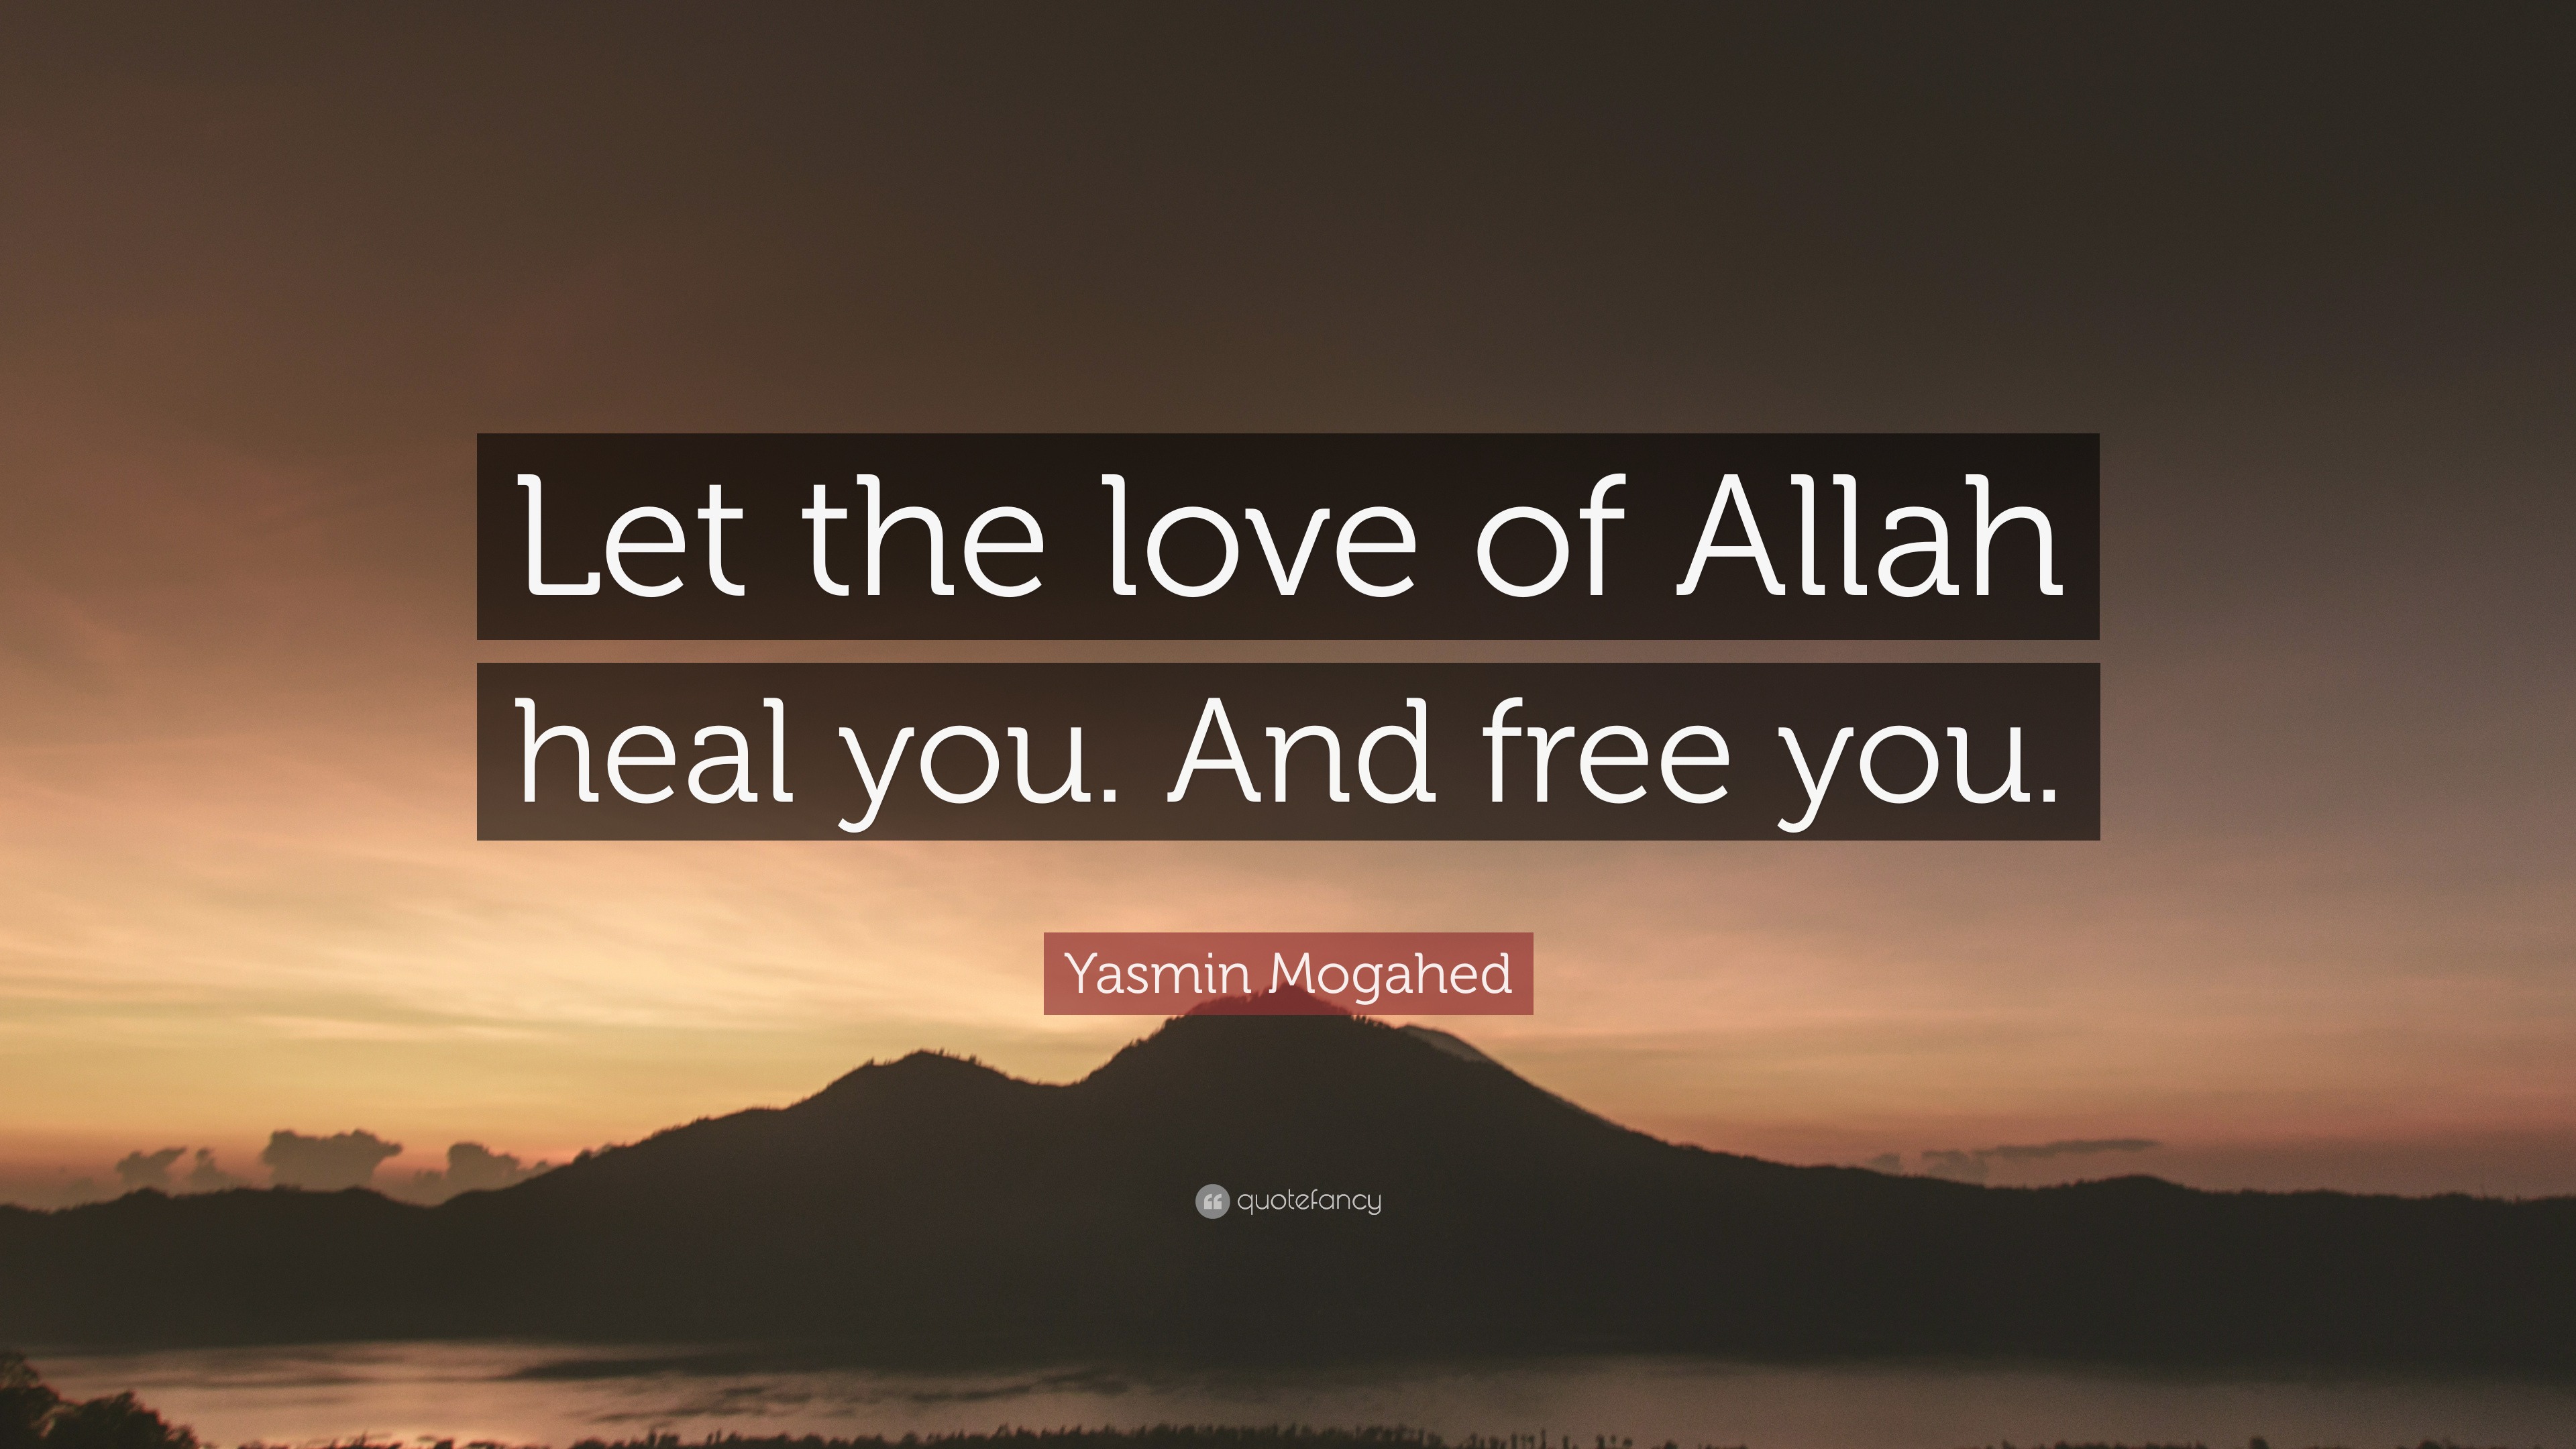 Yasmin Mogahed Quote “Let the love of Allah heal you. And free you